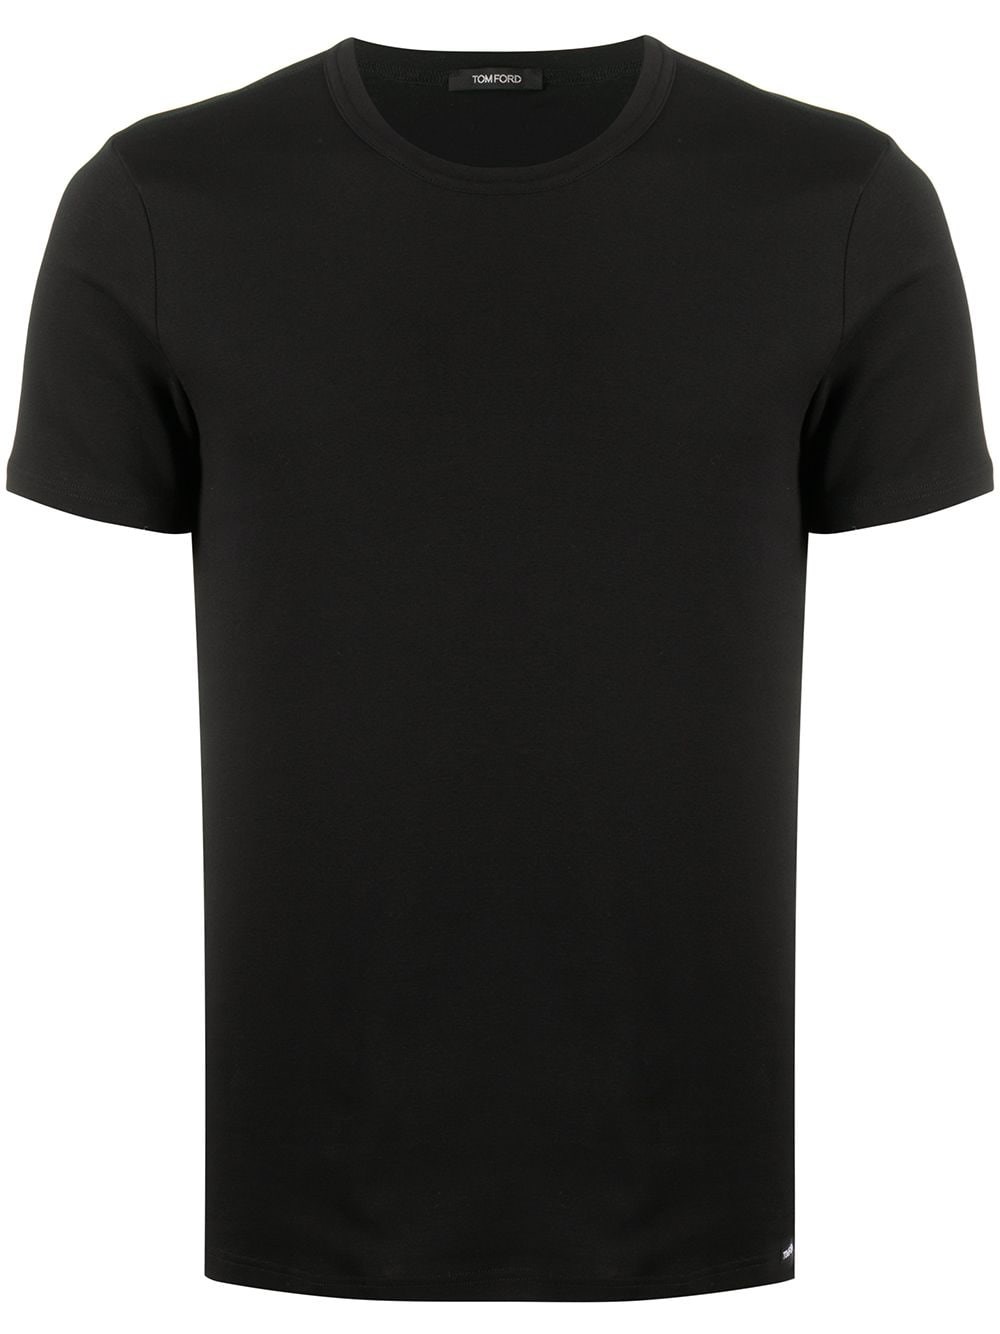 tom ford T-SHIRT available on montiboutique.com - 56529